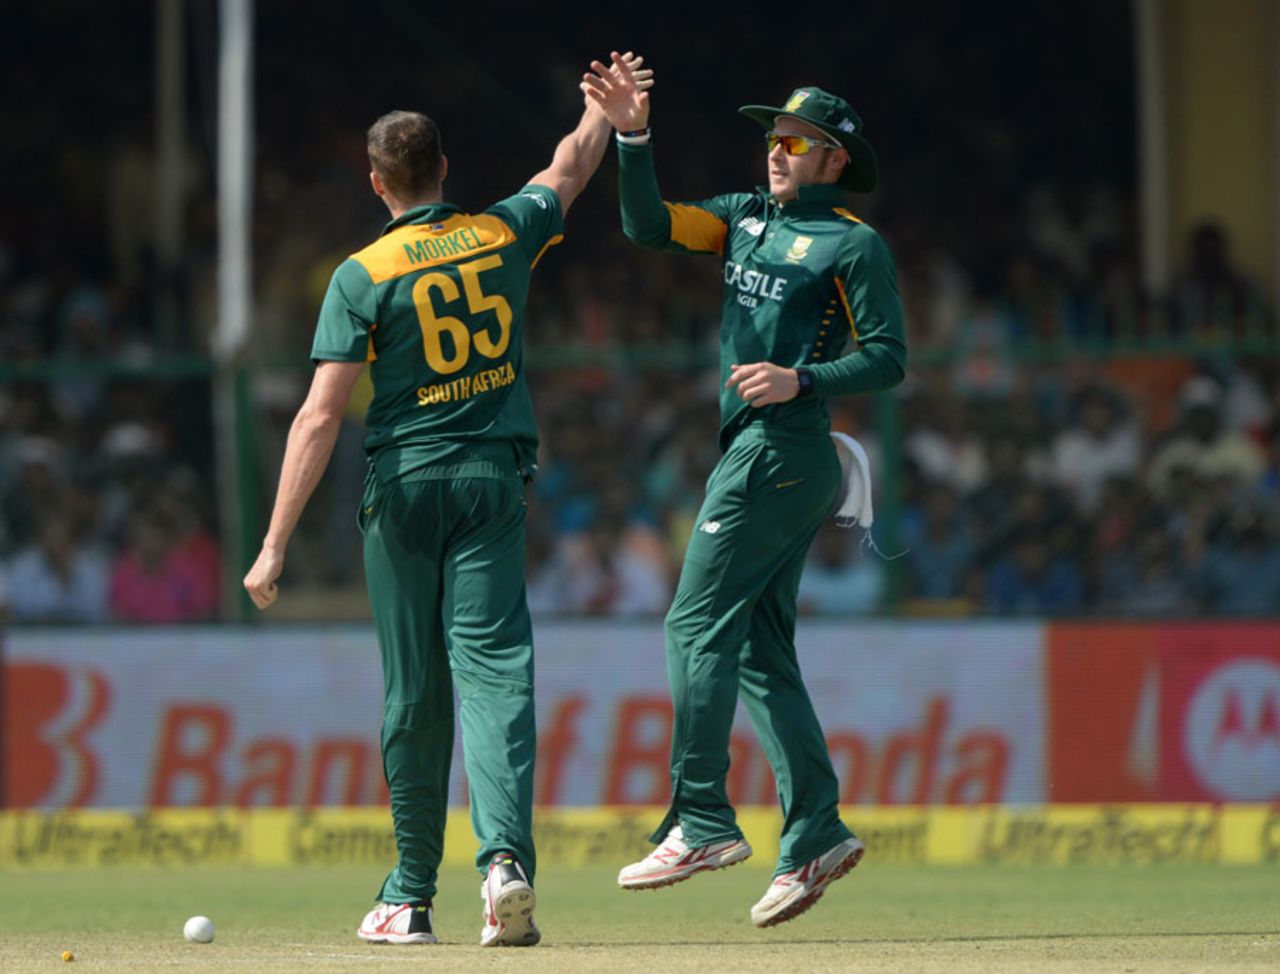 Morne Morkel and David Miller celebrate the wicket of Shikhar Dhawan, India v South Africa, 1st ODI, Kanpur, October 11, 2015